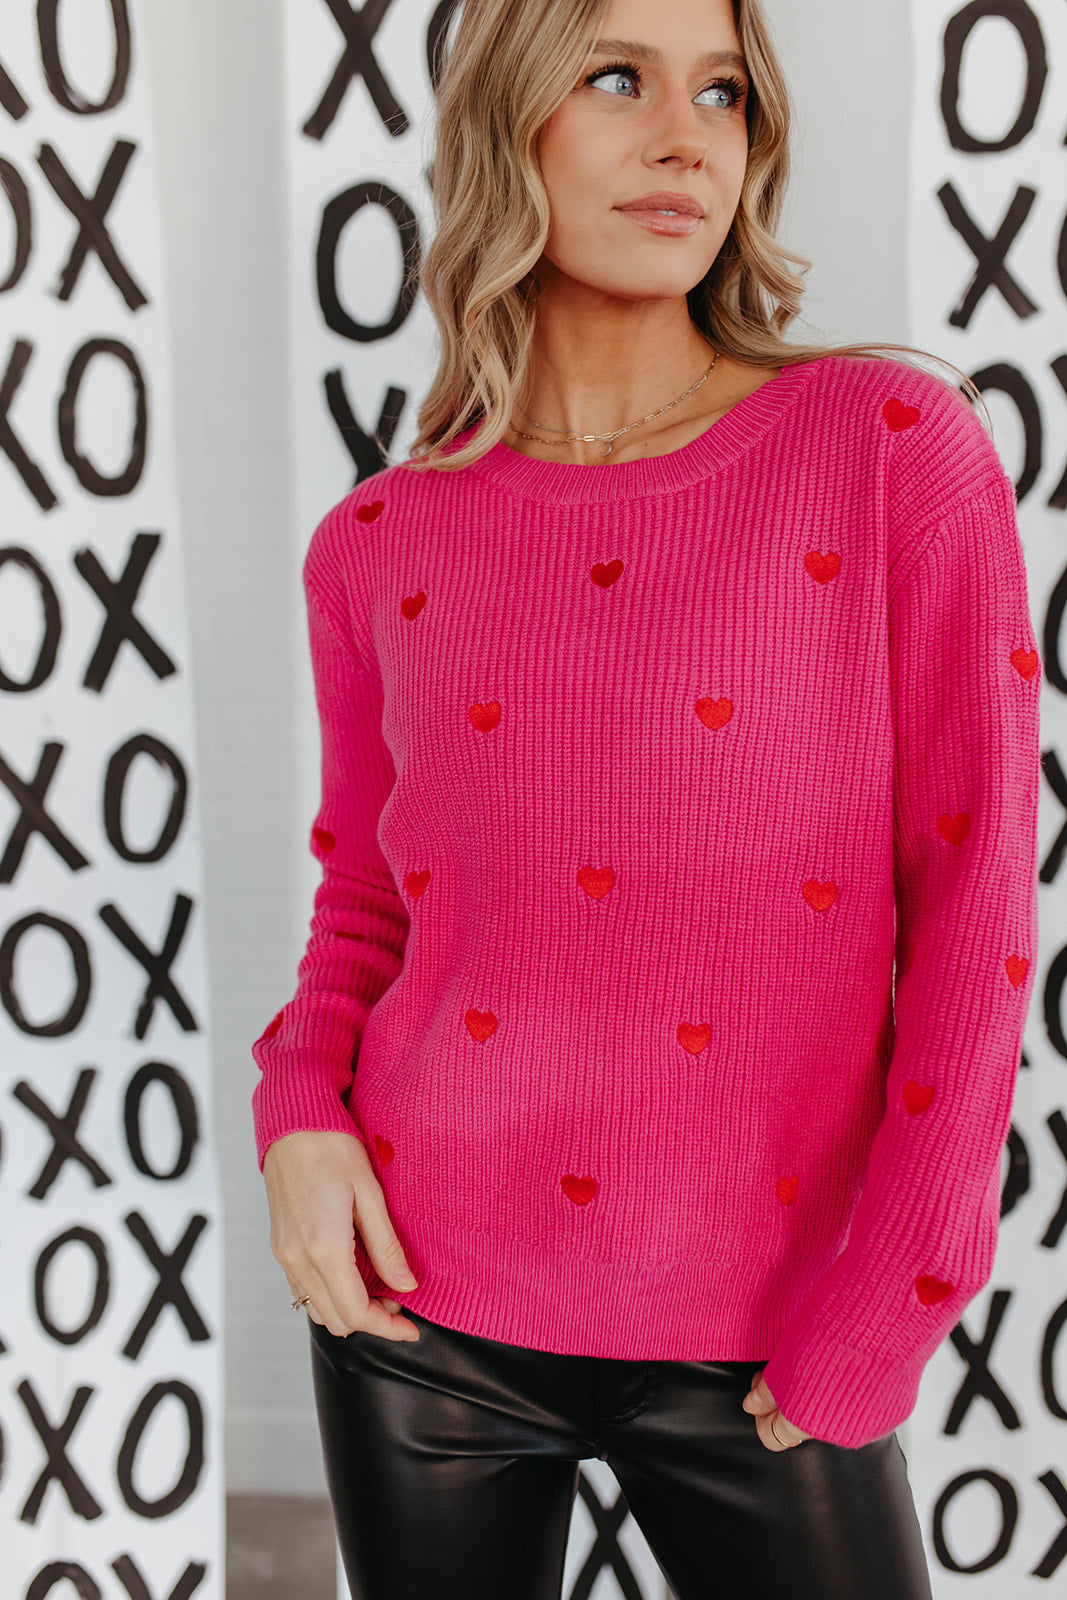 The Heart Confetti Sweater in Hot Pink Large